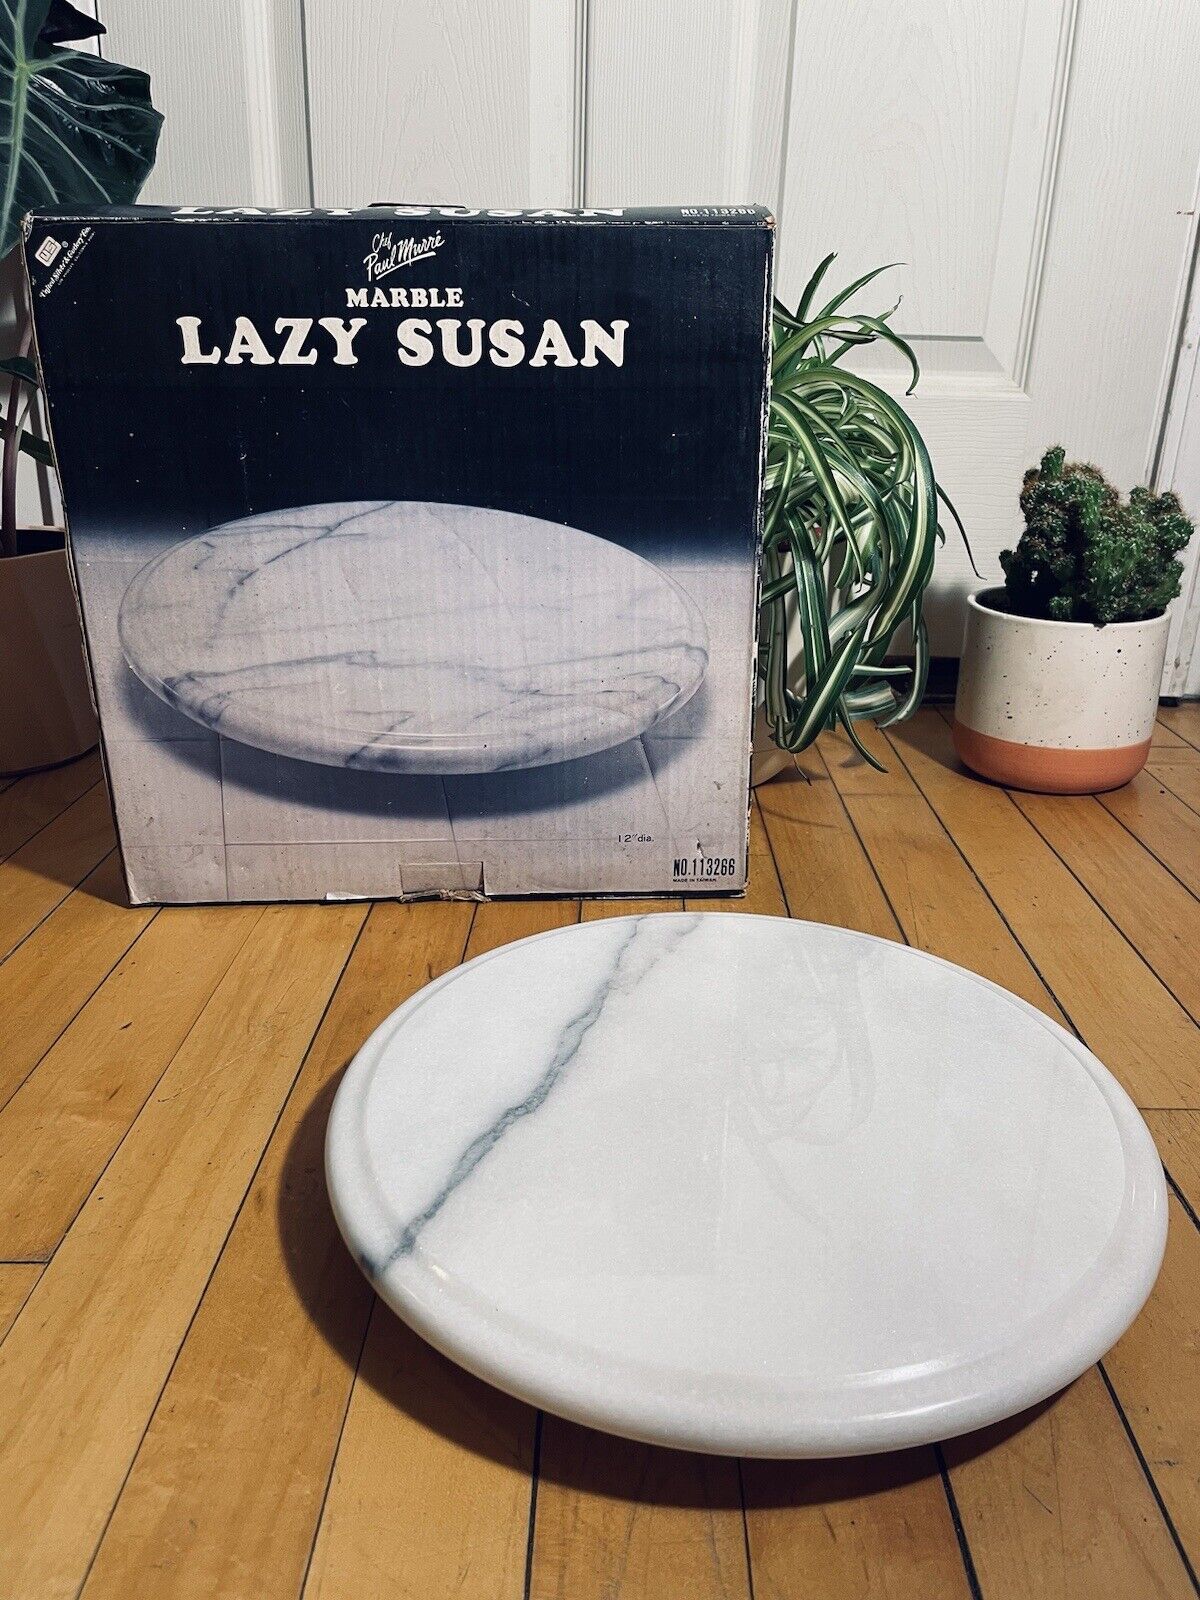 Vintage 70s Marble Lazy Susan Platter Appetizer Serving Tray BRAND NEW DEADSTOCK